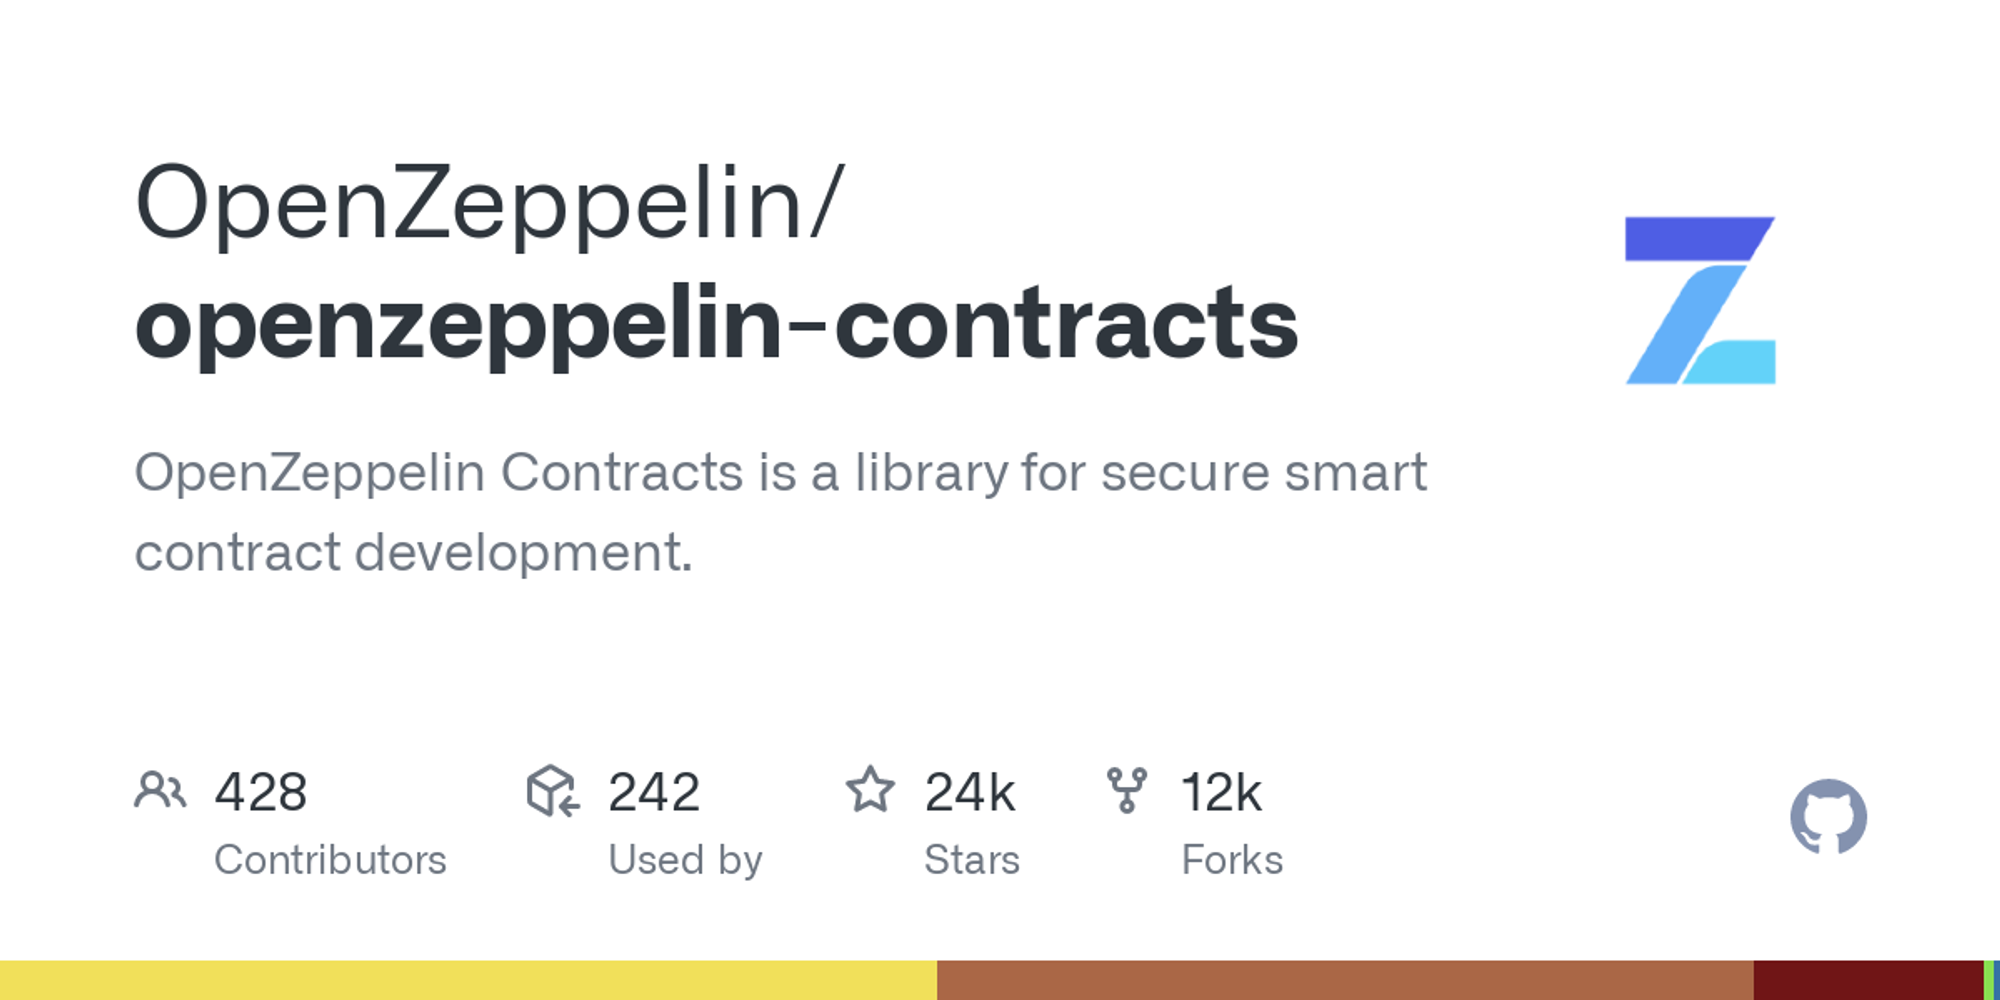 openzeppelin-contracts/ERC721.sol at master · OpenZeppelin/openzeppelin-contracts